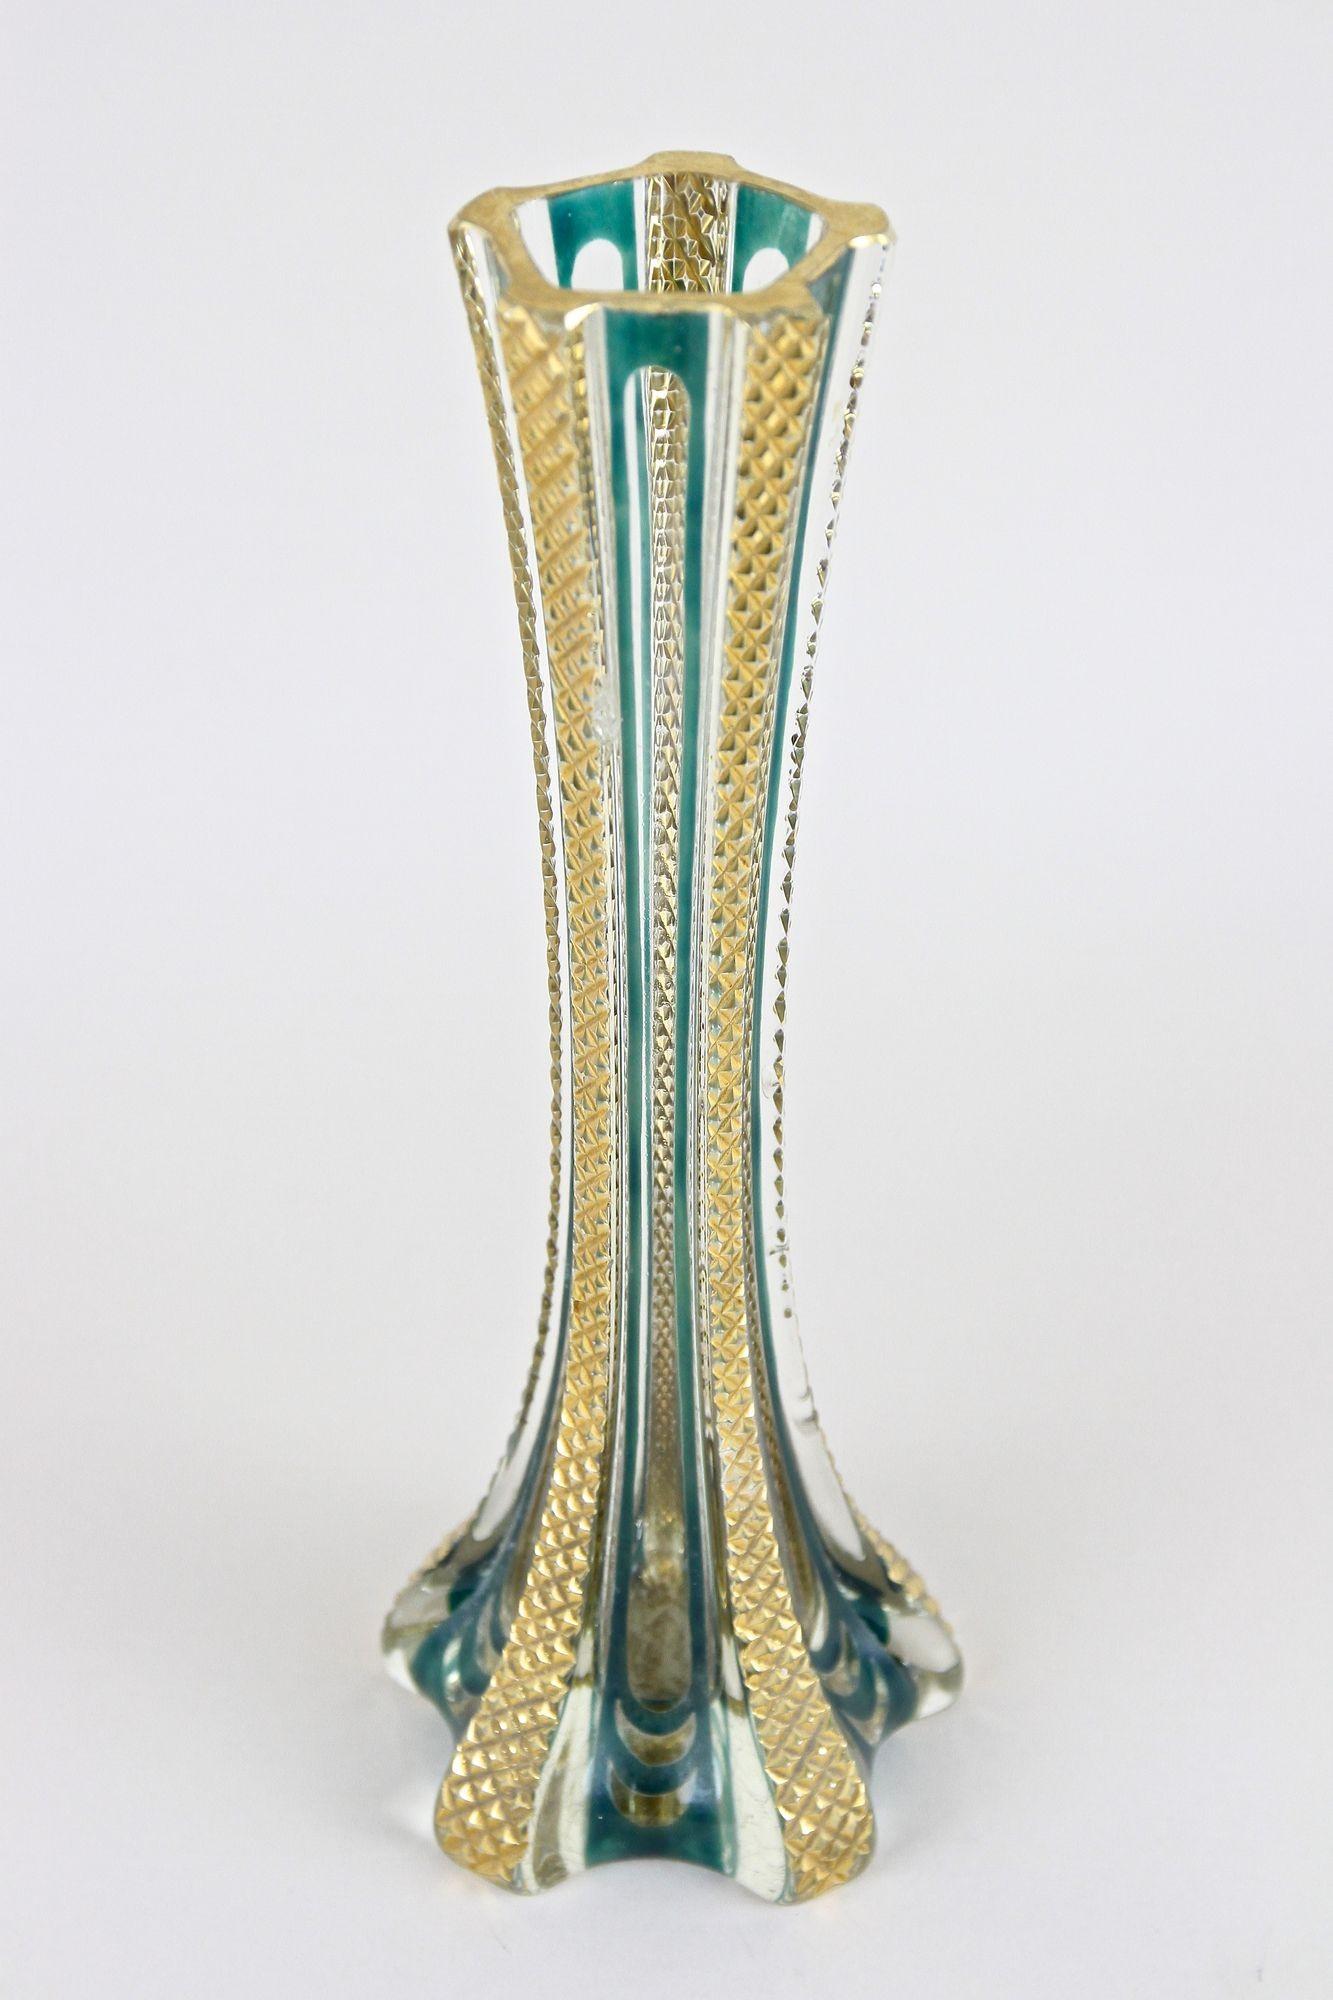 Murano Glass Vase With Gold Accents, Early 20th Century - Italy ca. 1930 For Sale 9